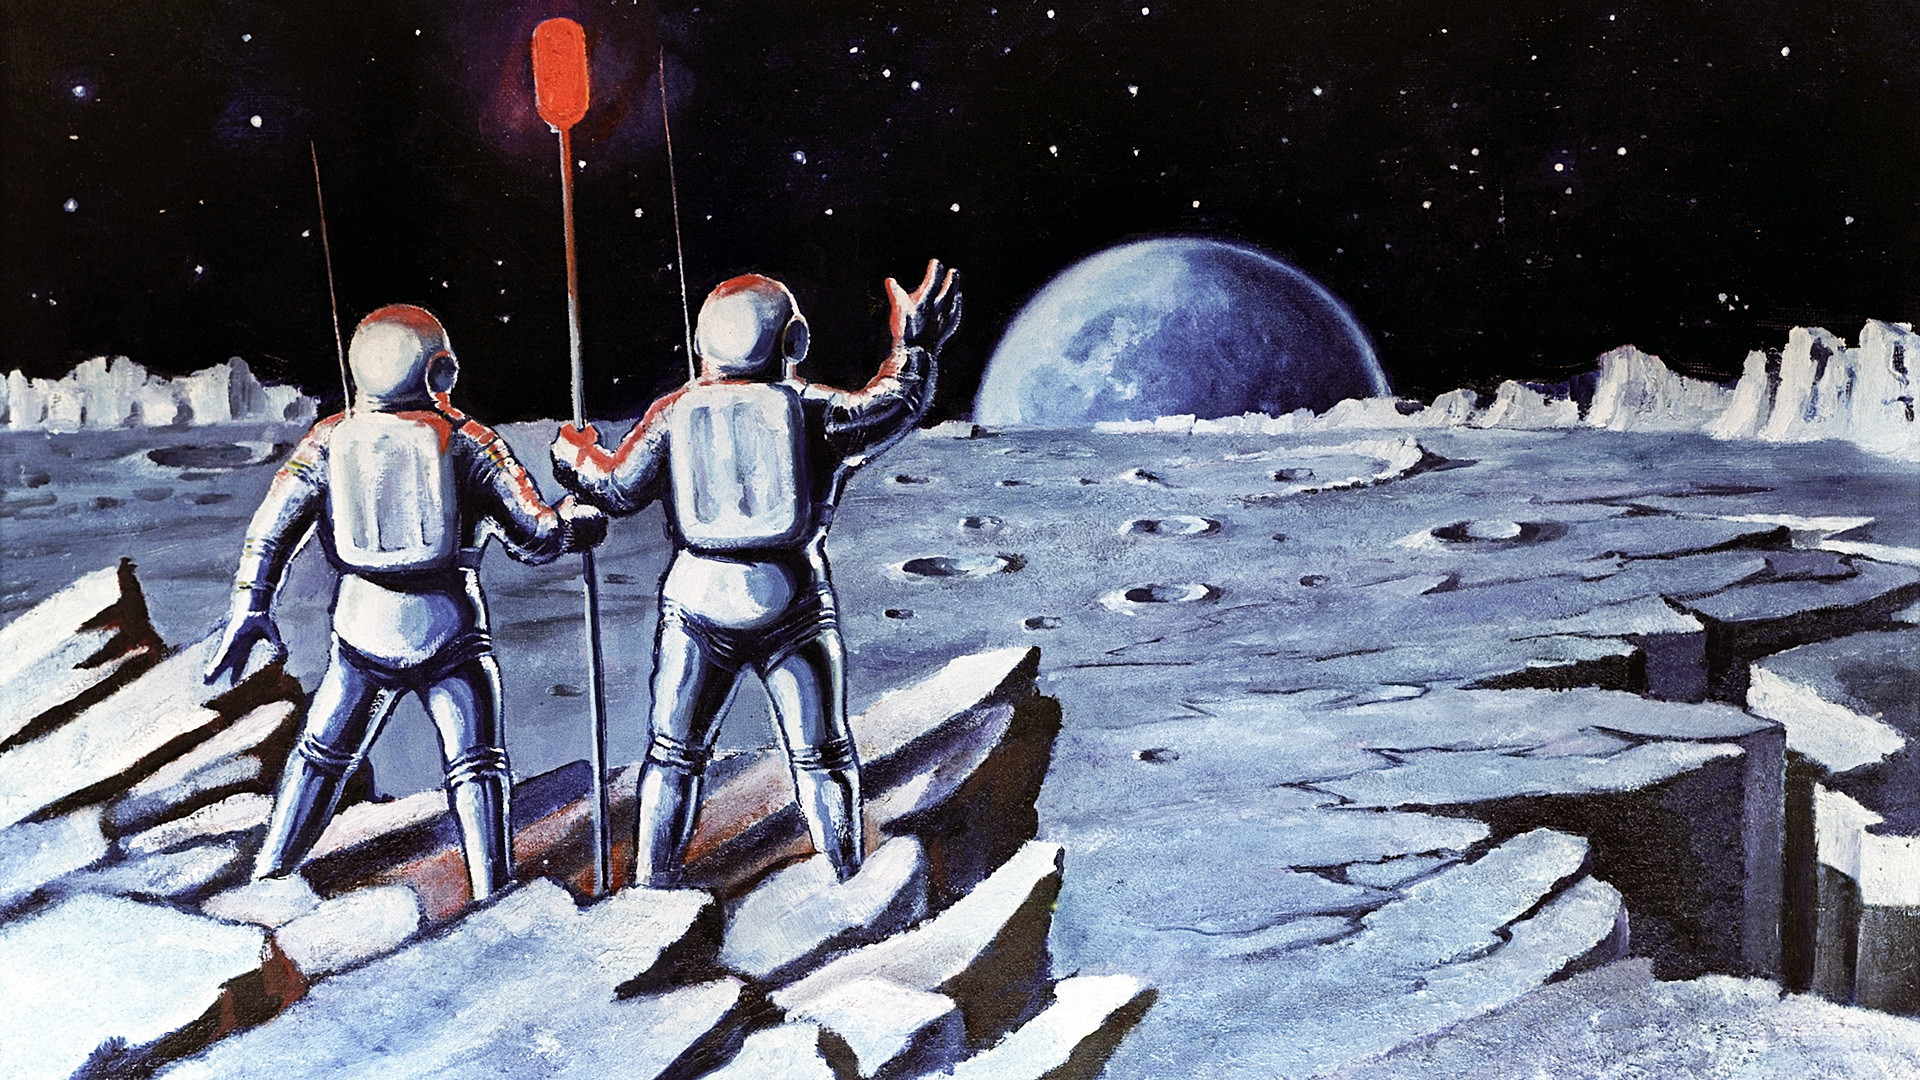 The artwork "Humans on the Moon" by Alexei Leonov, science fiction artist and Soviet cosmonaut. 